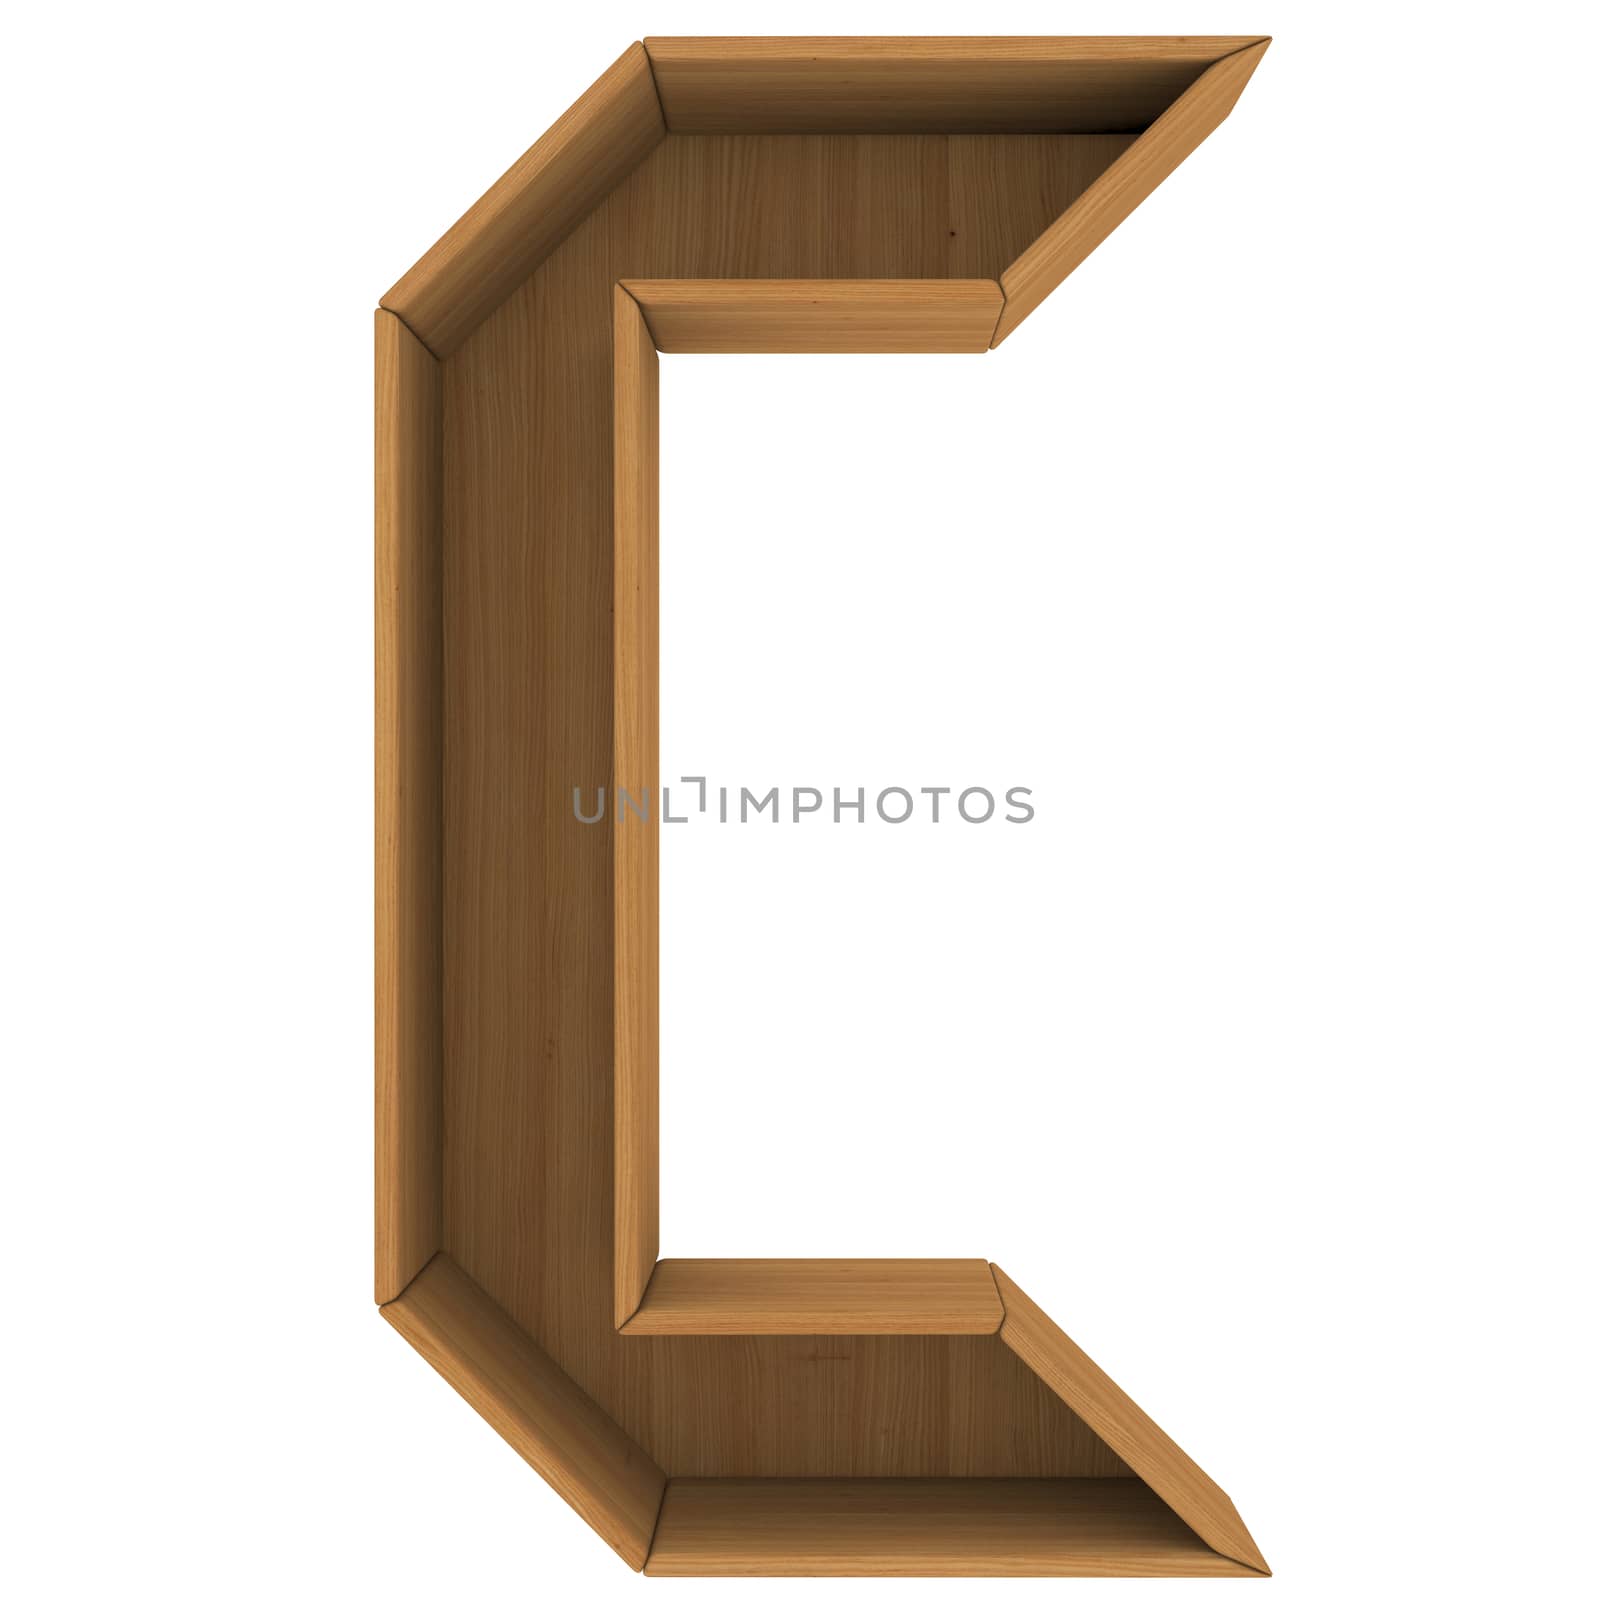 Wooden cabinet-letter. Isolated render on a white background